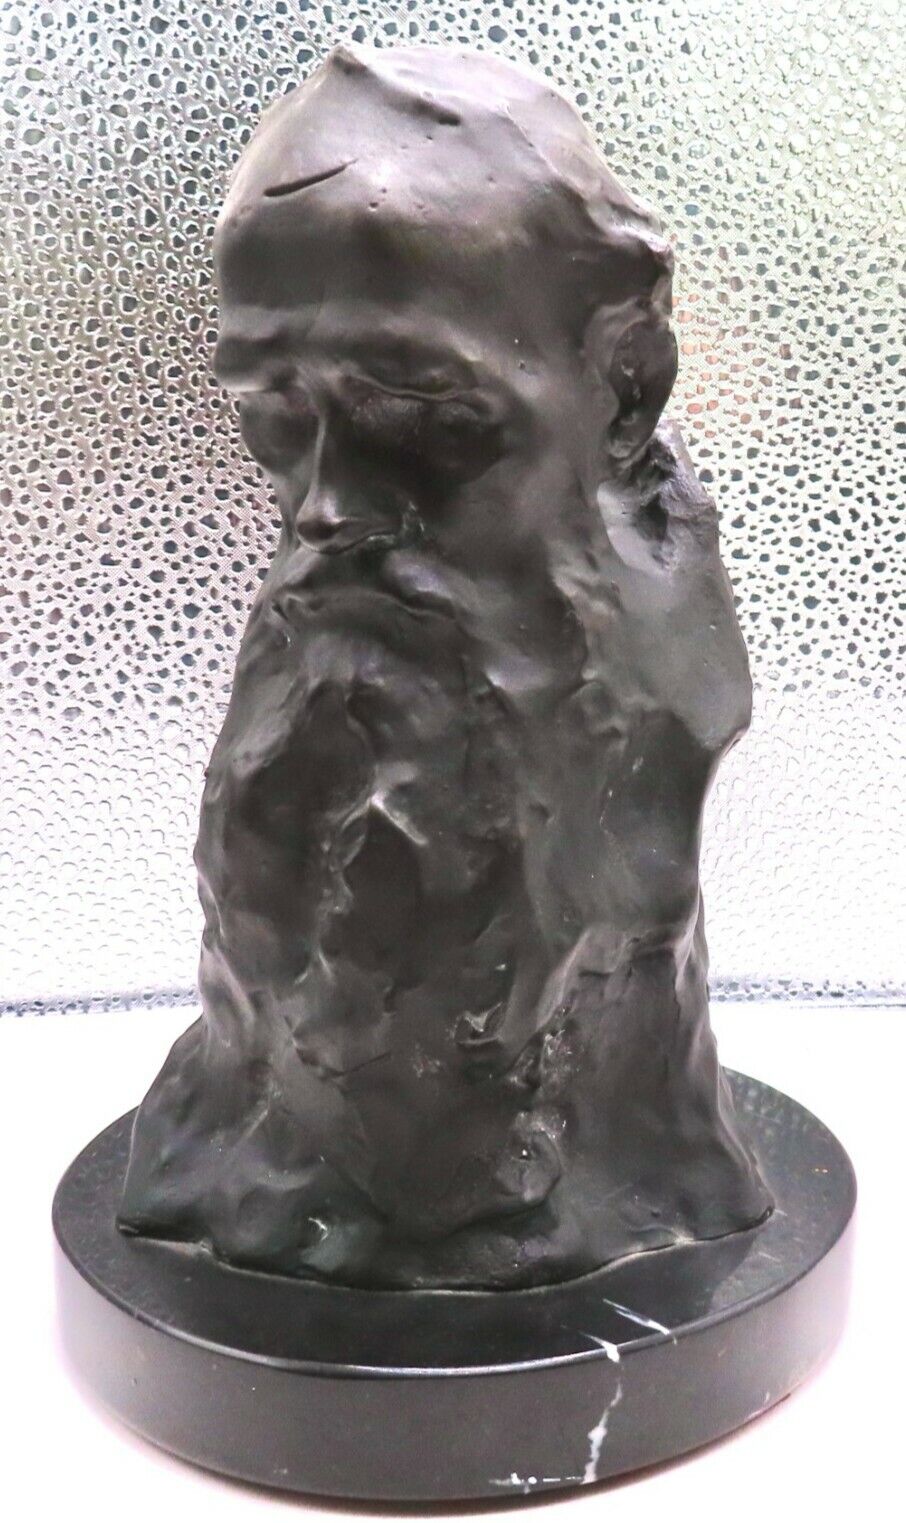 Tolstoy Bronze Bust on black marble base - 1902 - signed